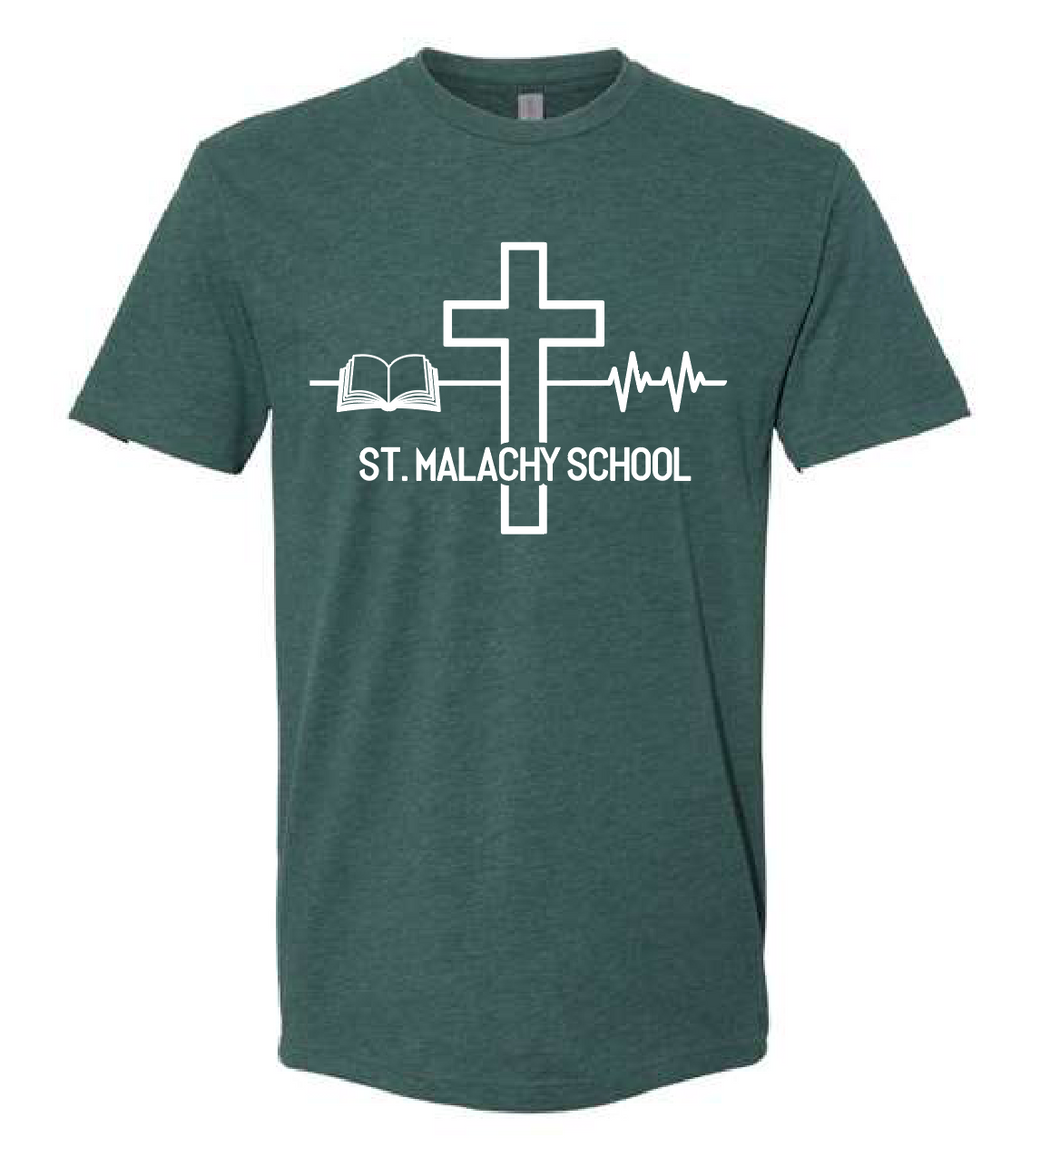 St. Malachy Shirt - Heather Forest Green